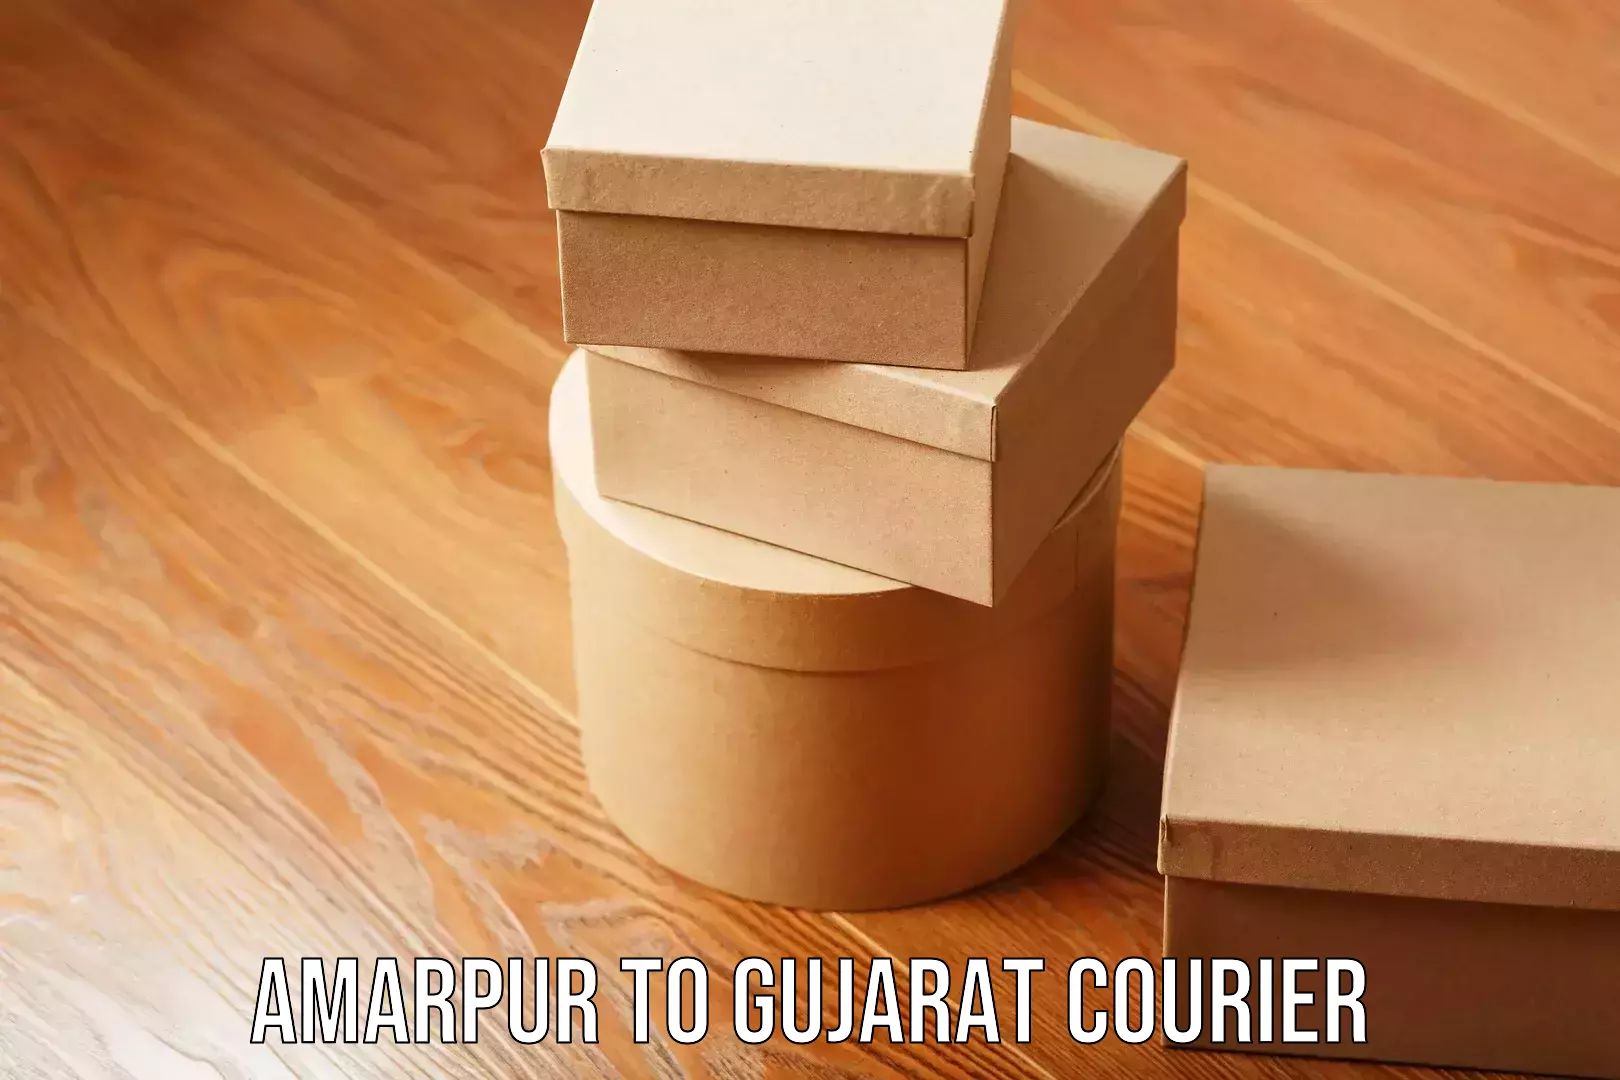 Efficient courier operations Amarpur to Gujarat